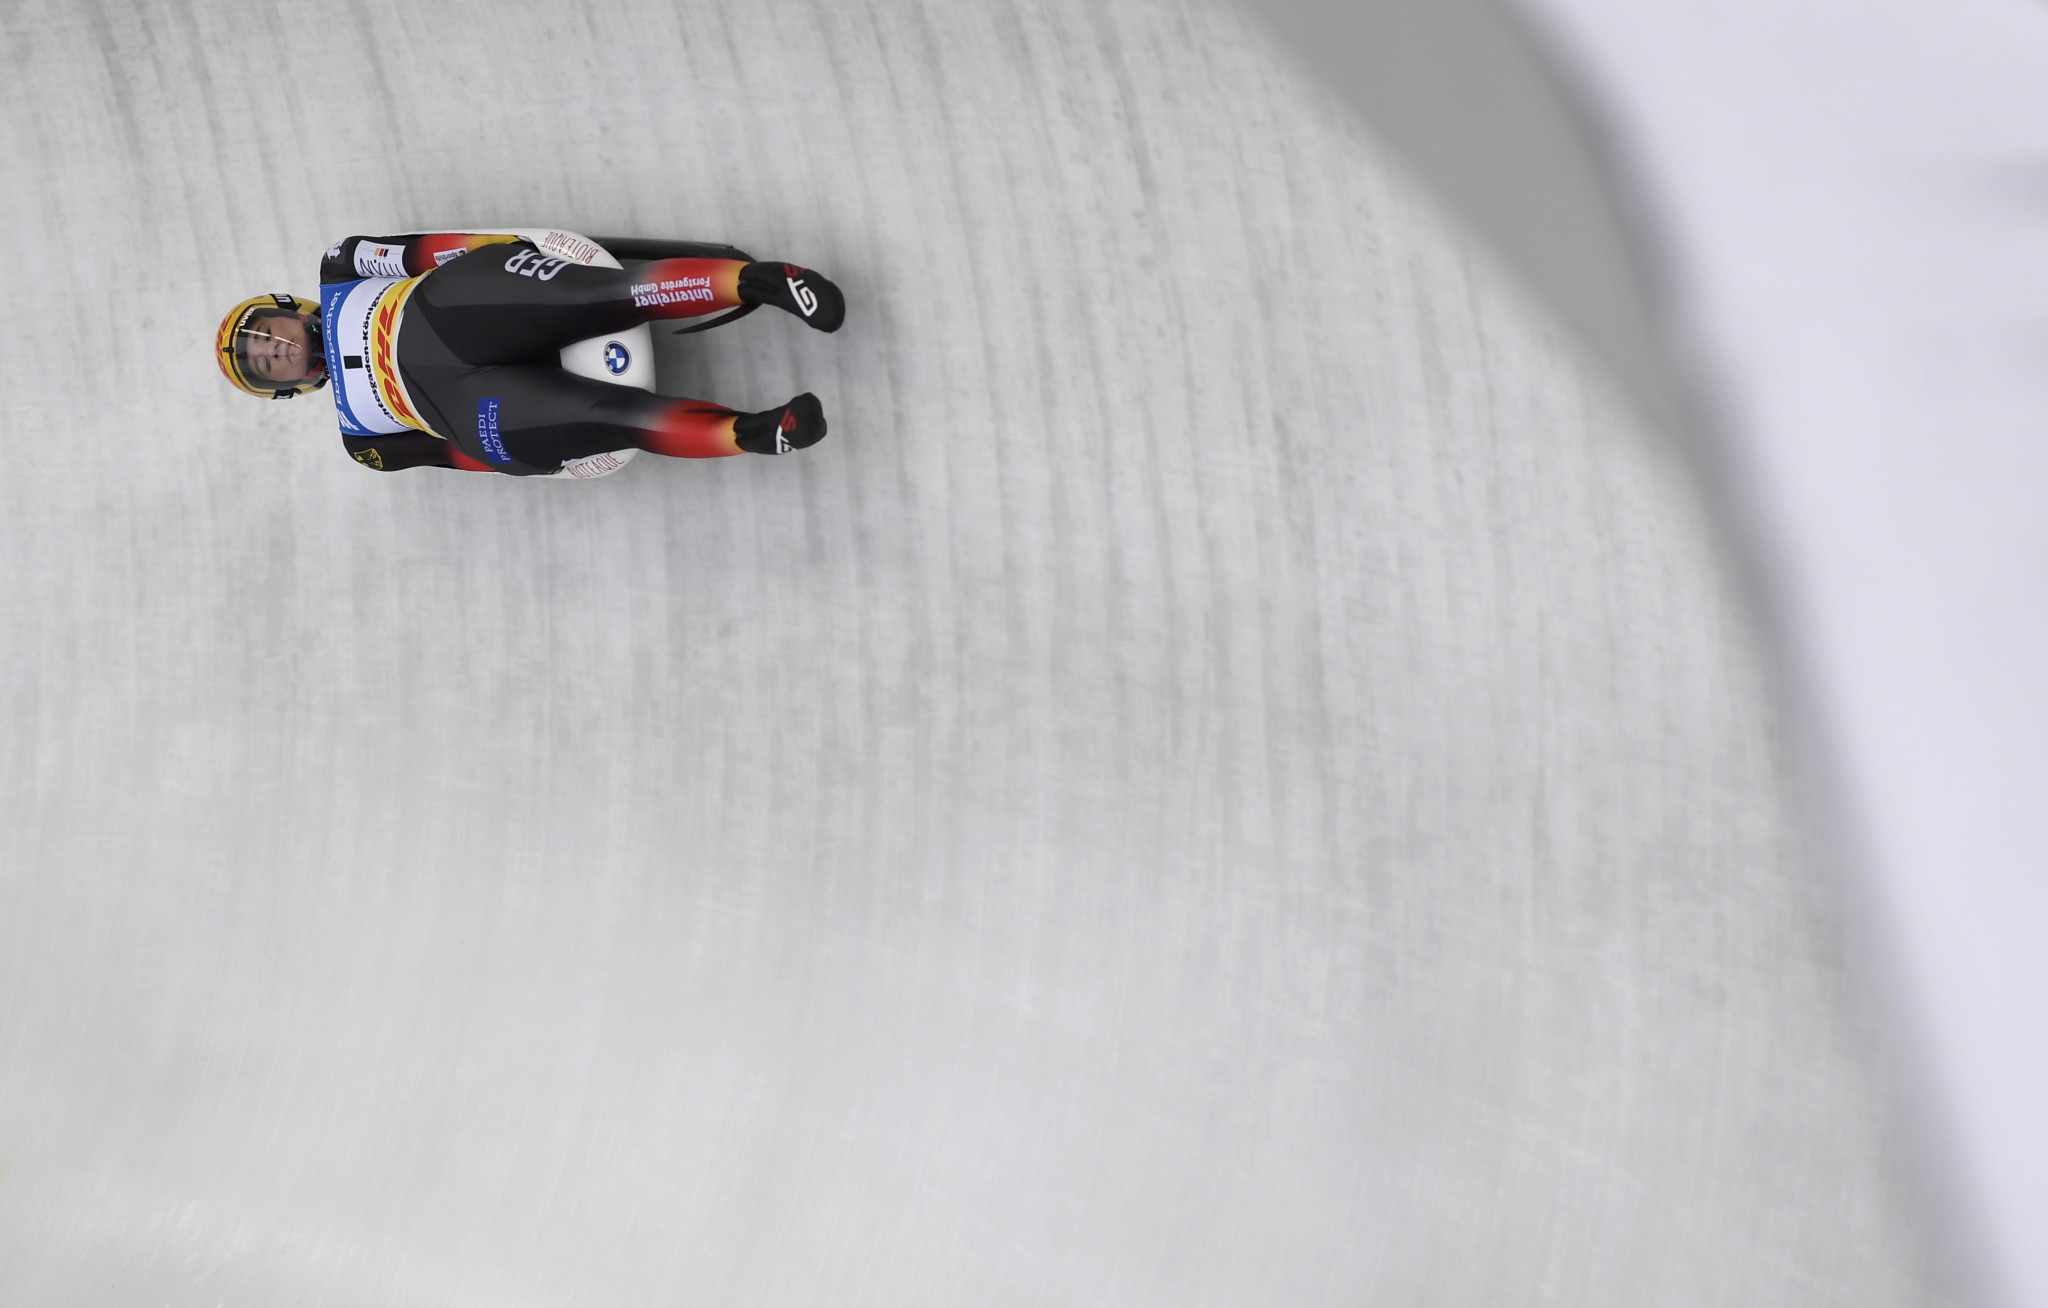 Luge star Geisenberger considers skipping Beijing 2022 over COVID-19 conditions